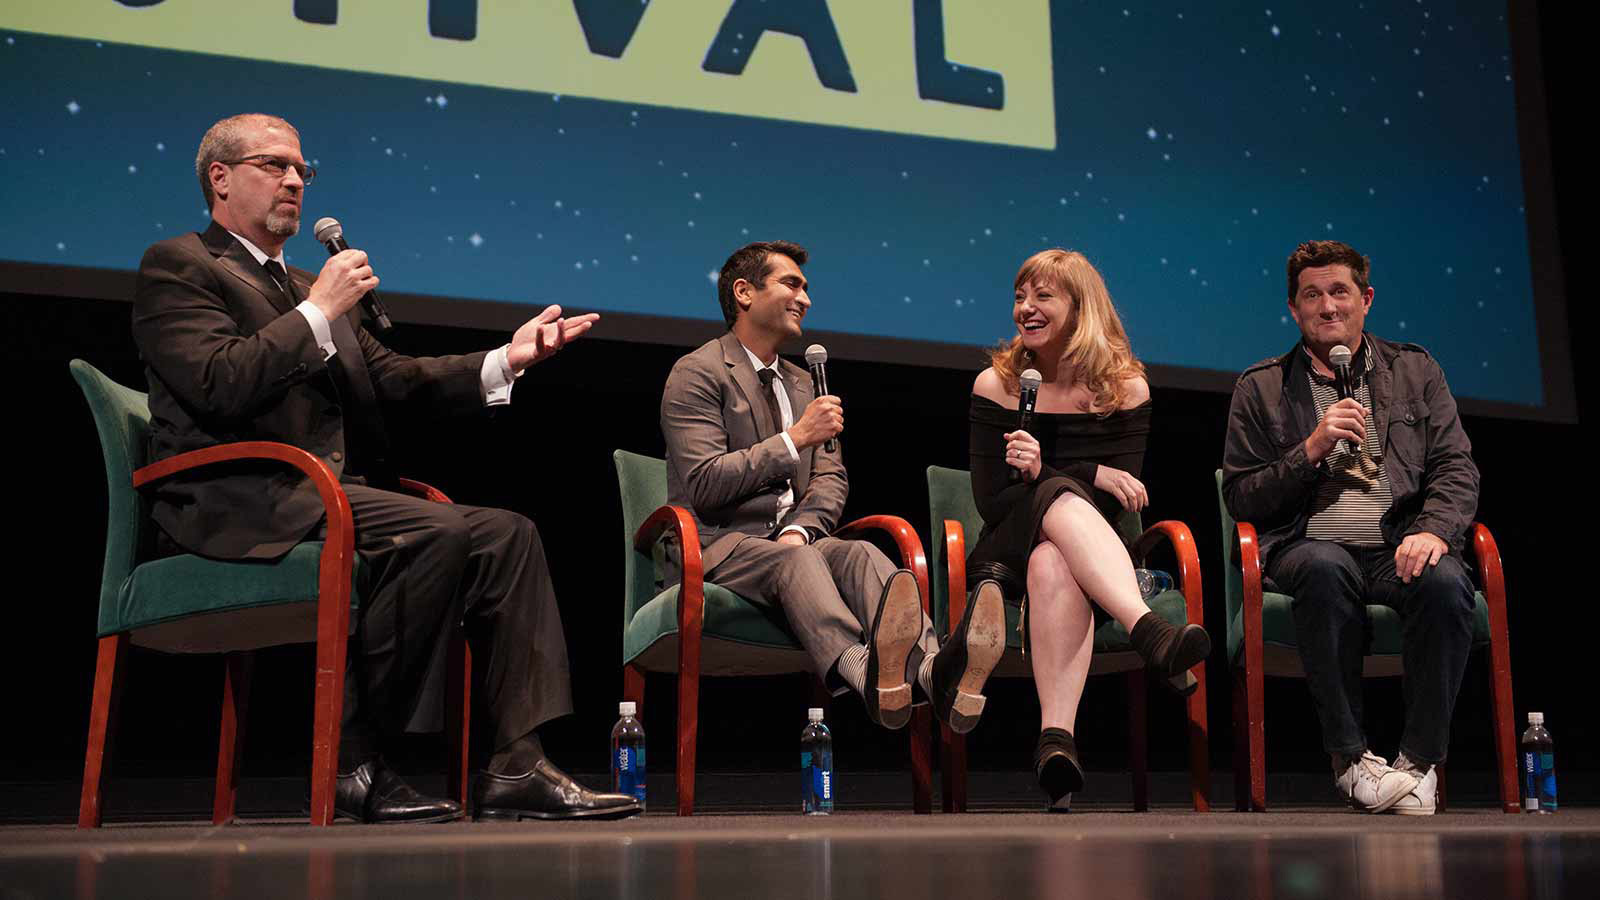 Keith Simanton from IMBD leads a Q&A with actor and writer, Kumail Nanjiani, actor and writer, Emily V. Gordon, and director, Michael Showalter after a screening of their film, The Big Sick